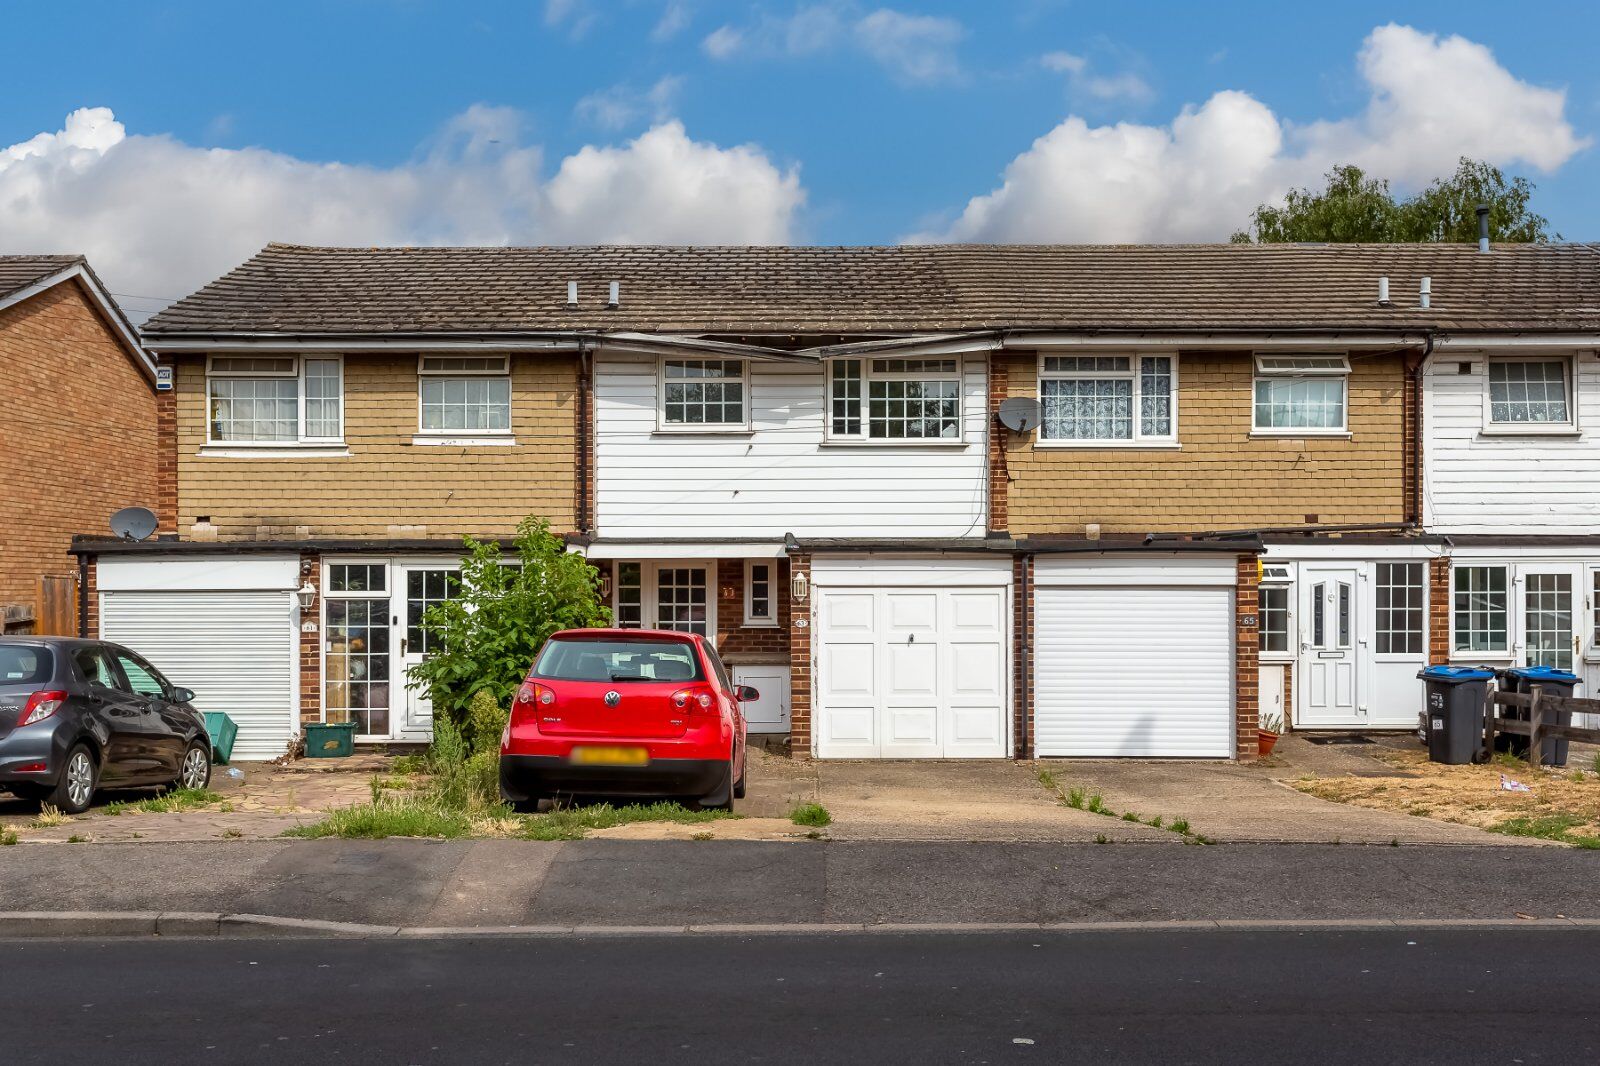 3 bedroom mid terraced house for sale Cedars Avenue, Mitcham, CR4, main image